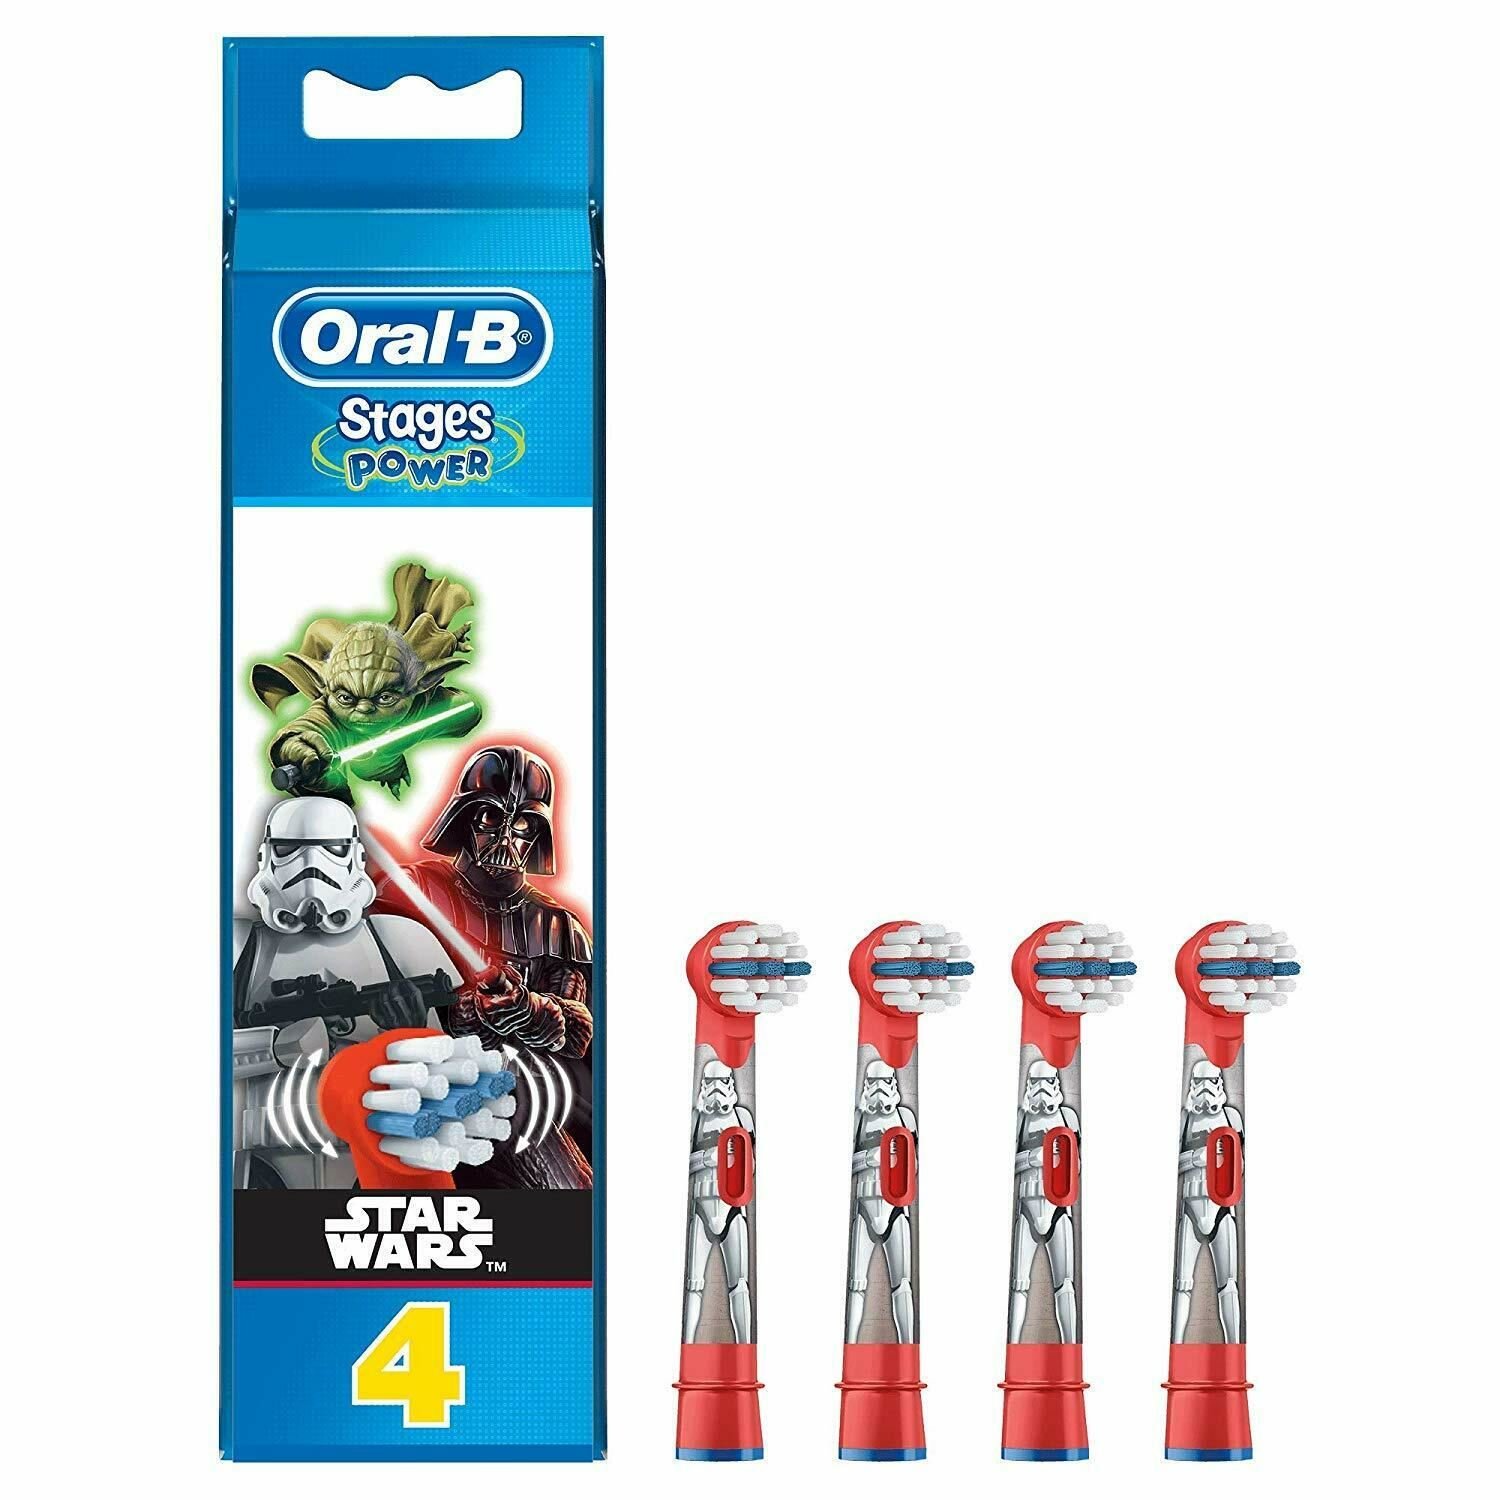 Oral-B Stages Power Star Wars Electric Toothbrush Replacement Heads 4 Pack